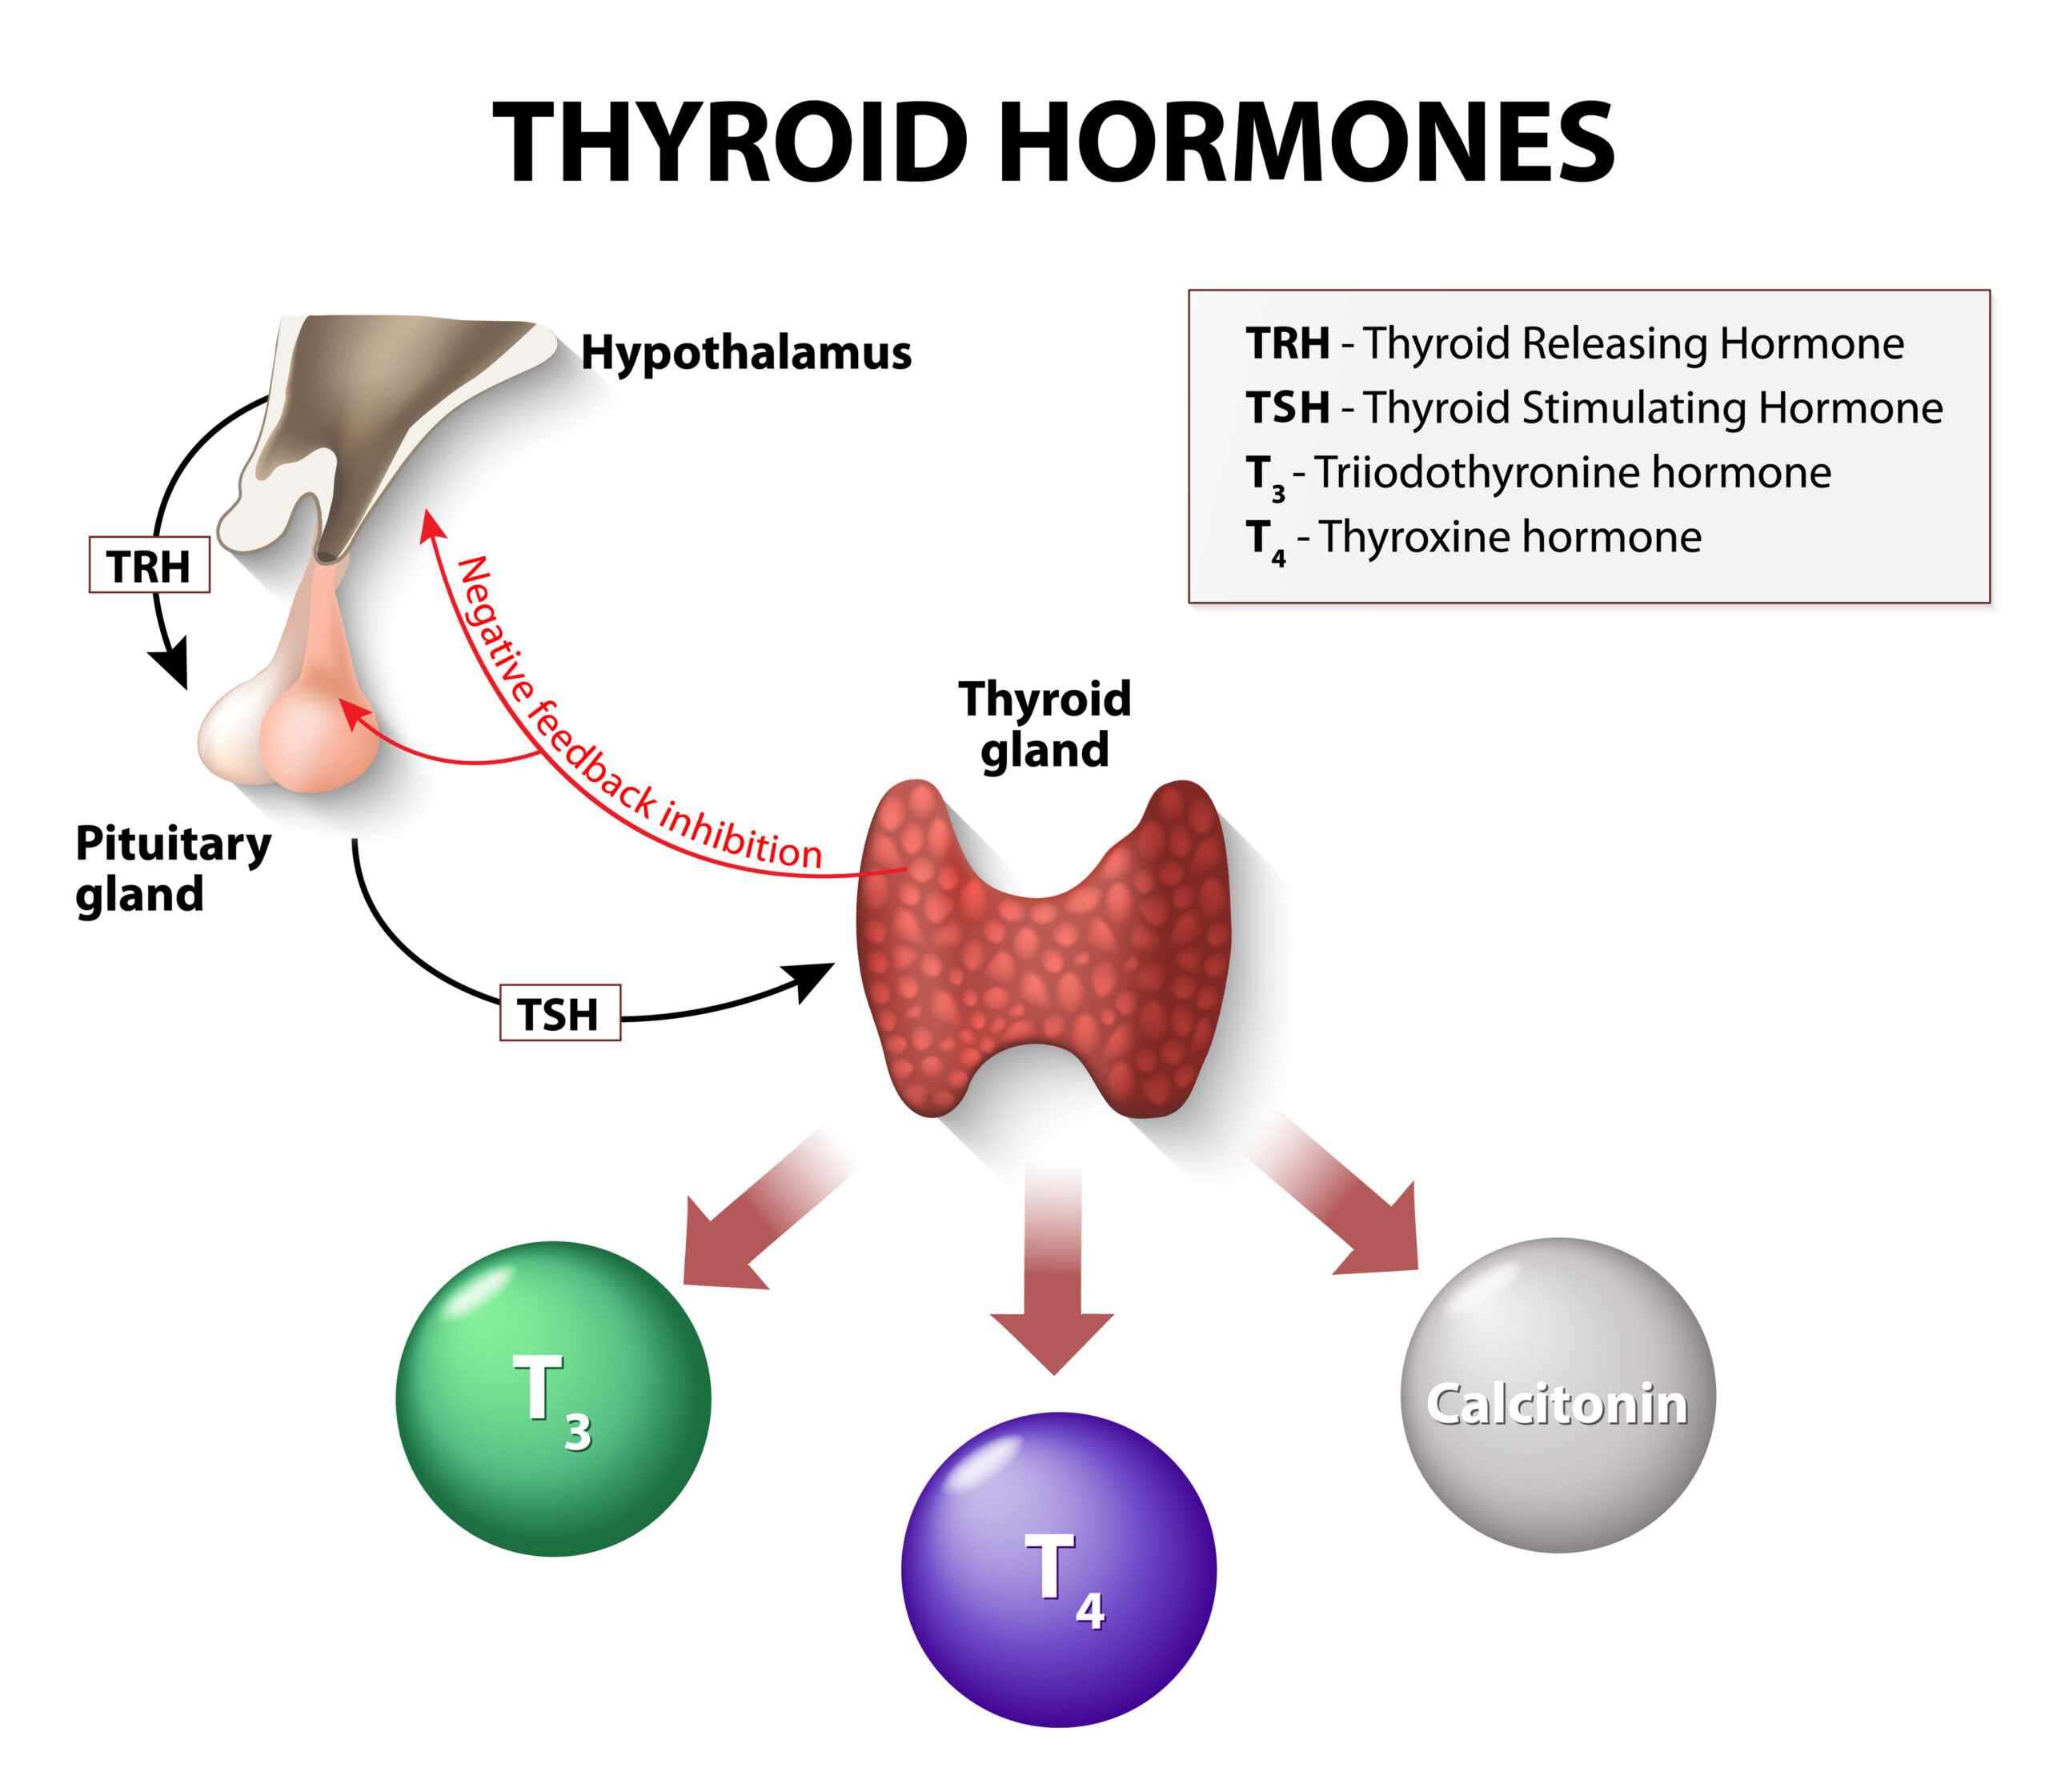 Thyroid hormones regulate your metabolism and the breakdown of food into energy.